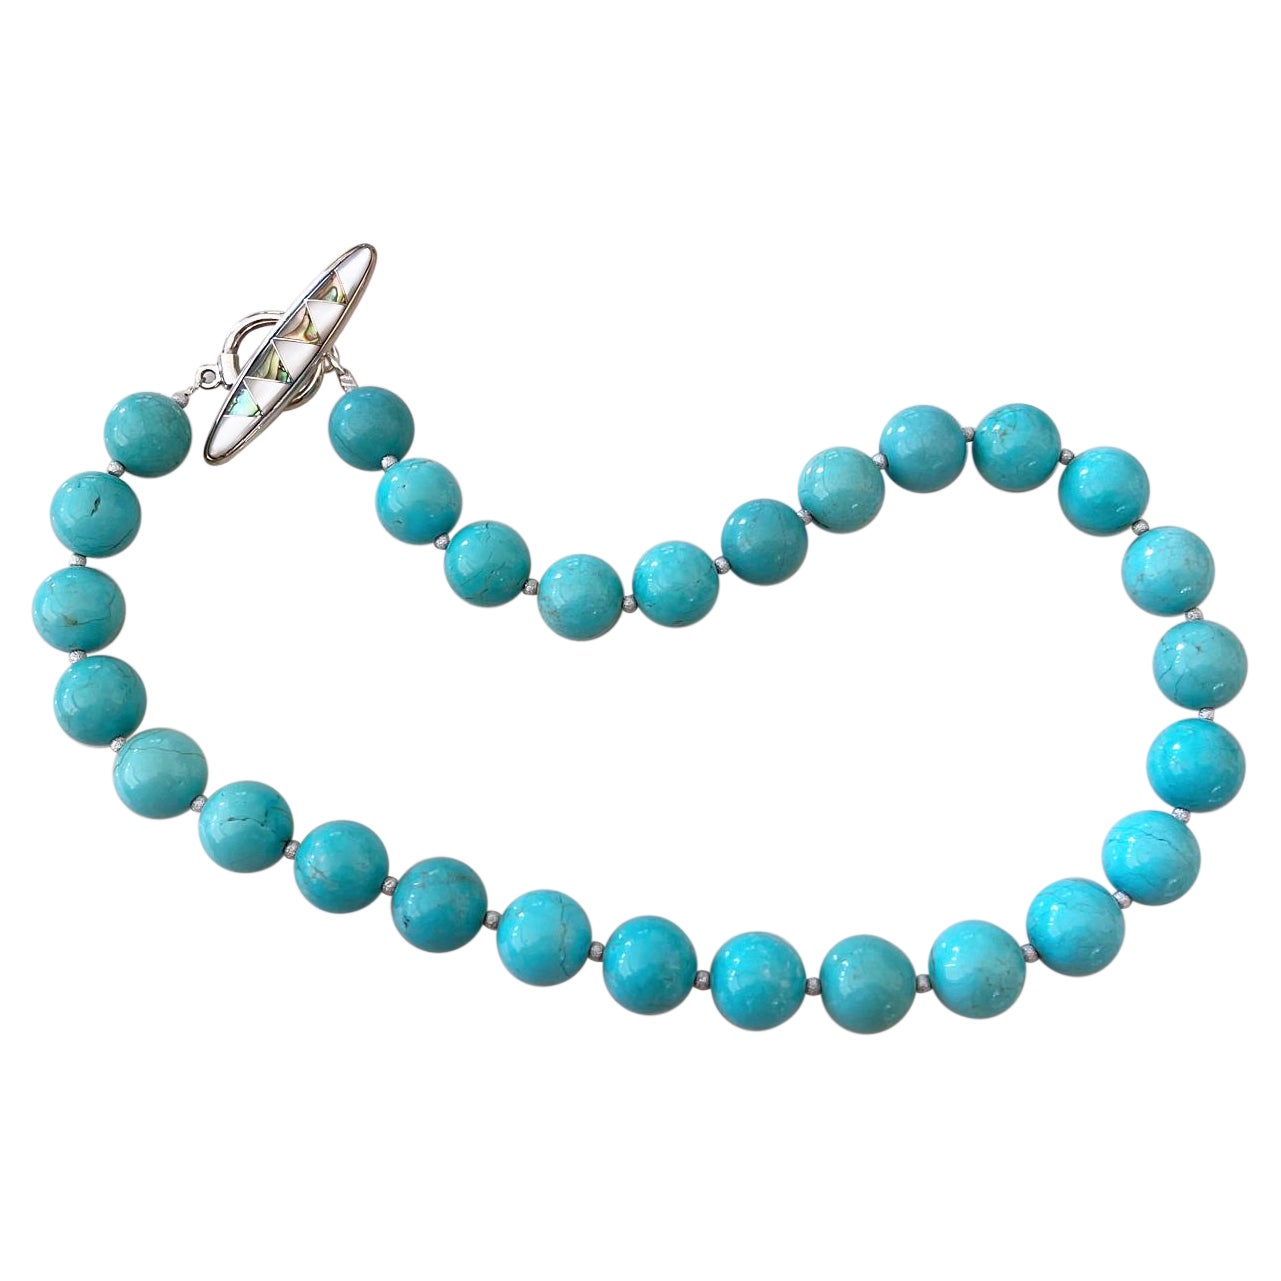 Nevada Number 8 Turquoise 14mm Round Beaded Necklace with Silver Inlay Clasp For Sale